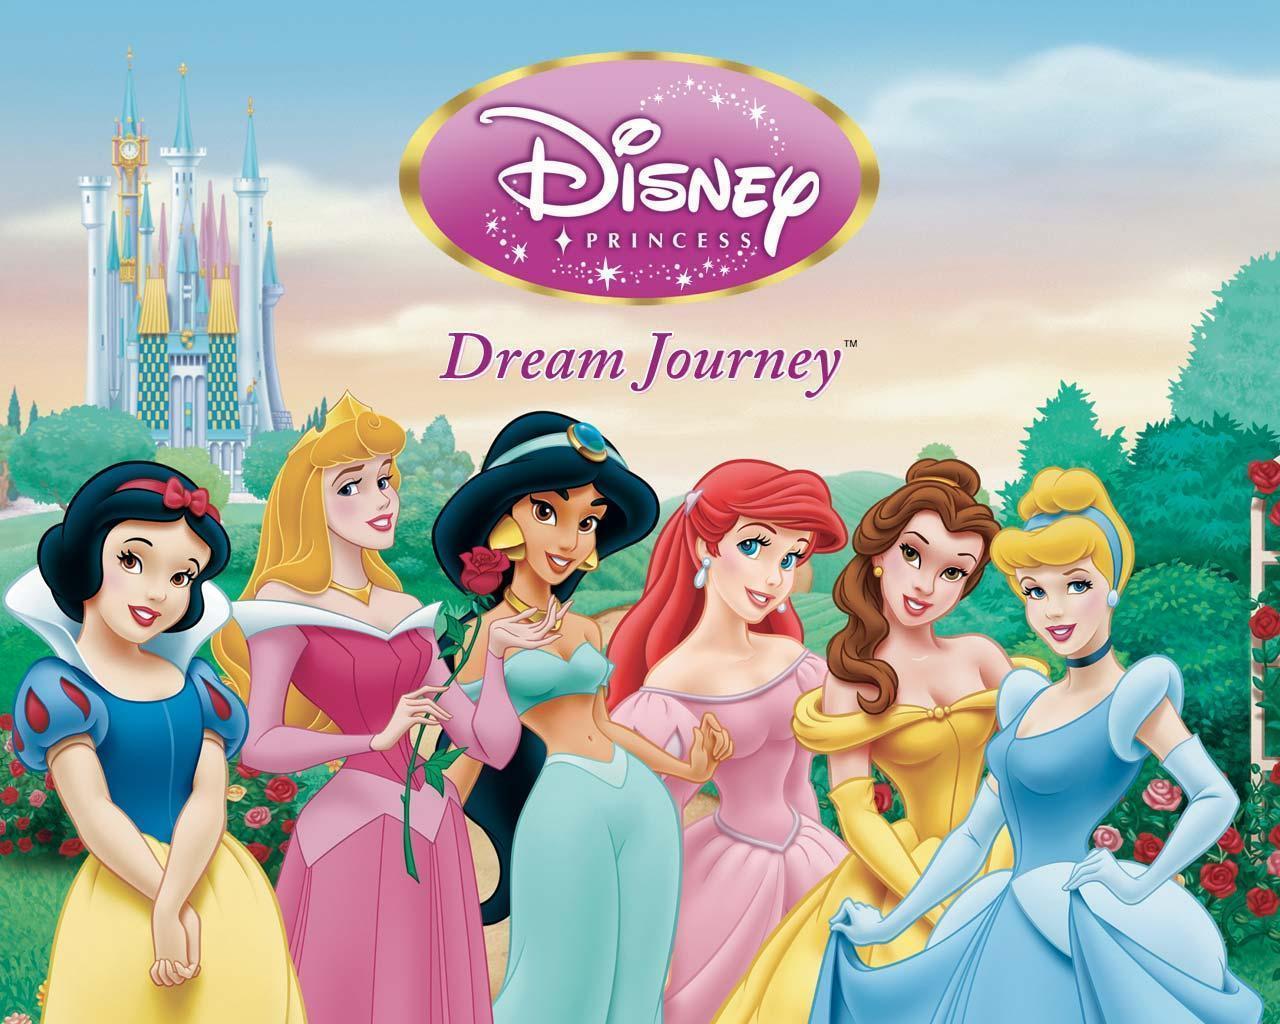 Welcome to the world of Disney Princess